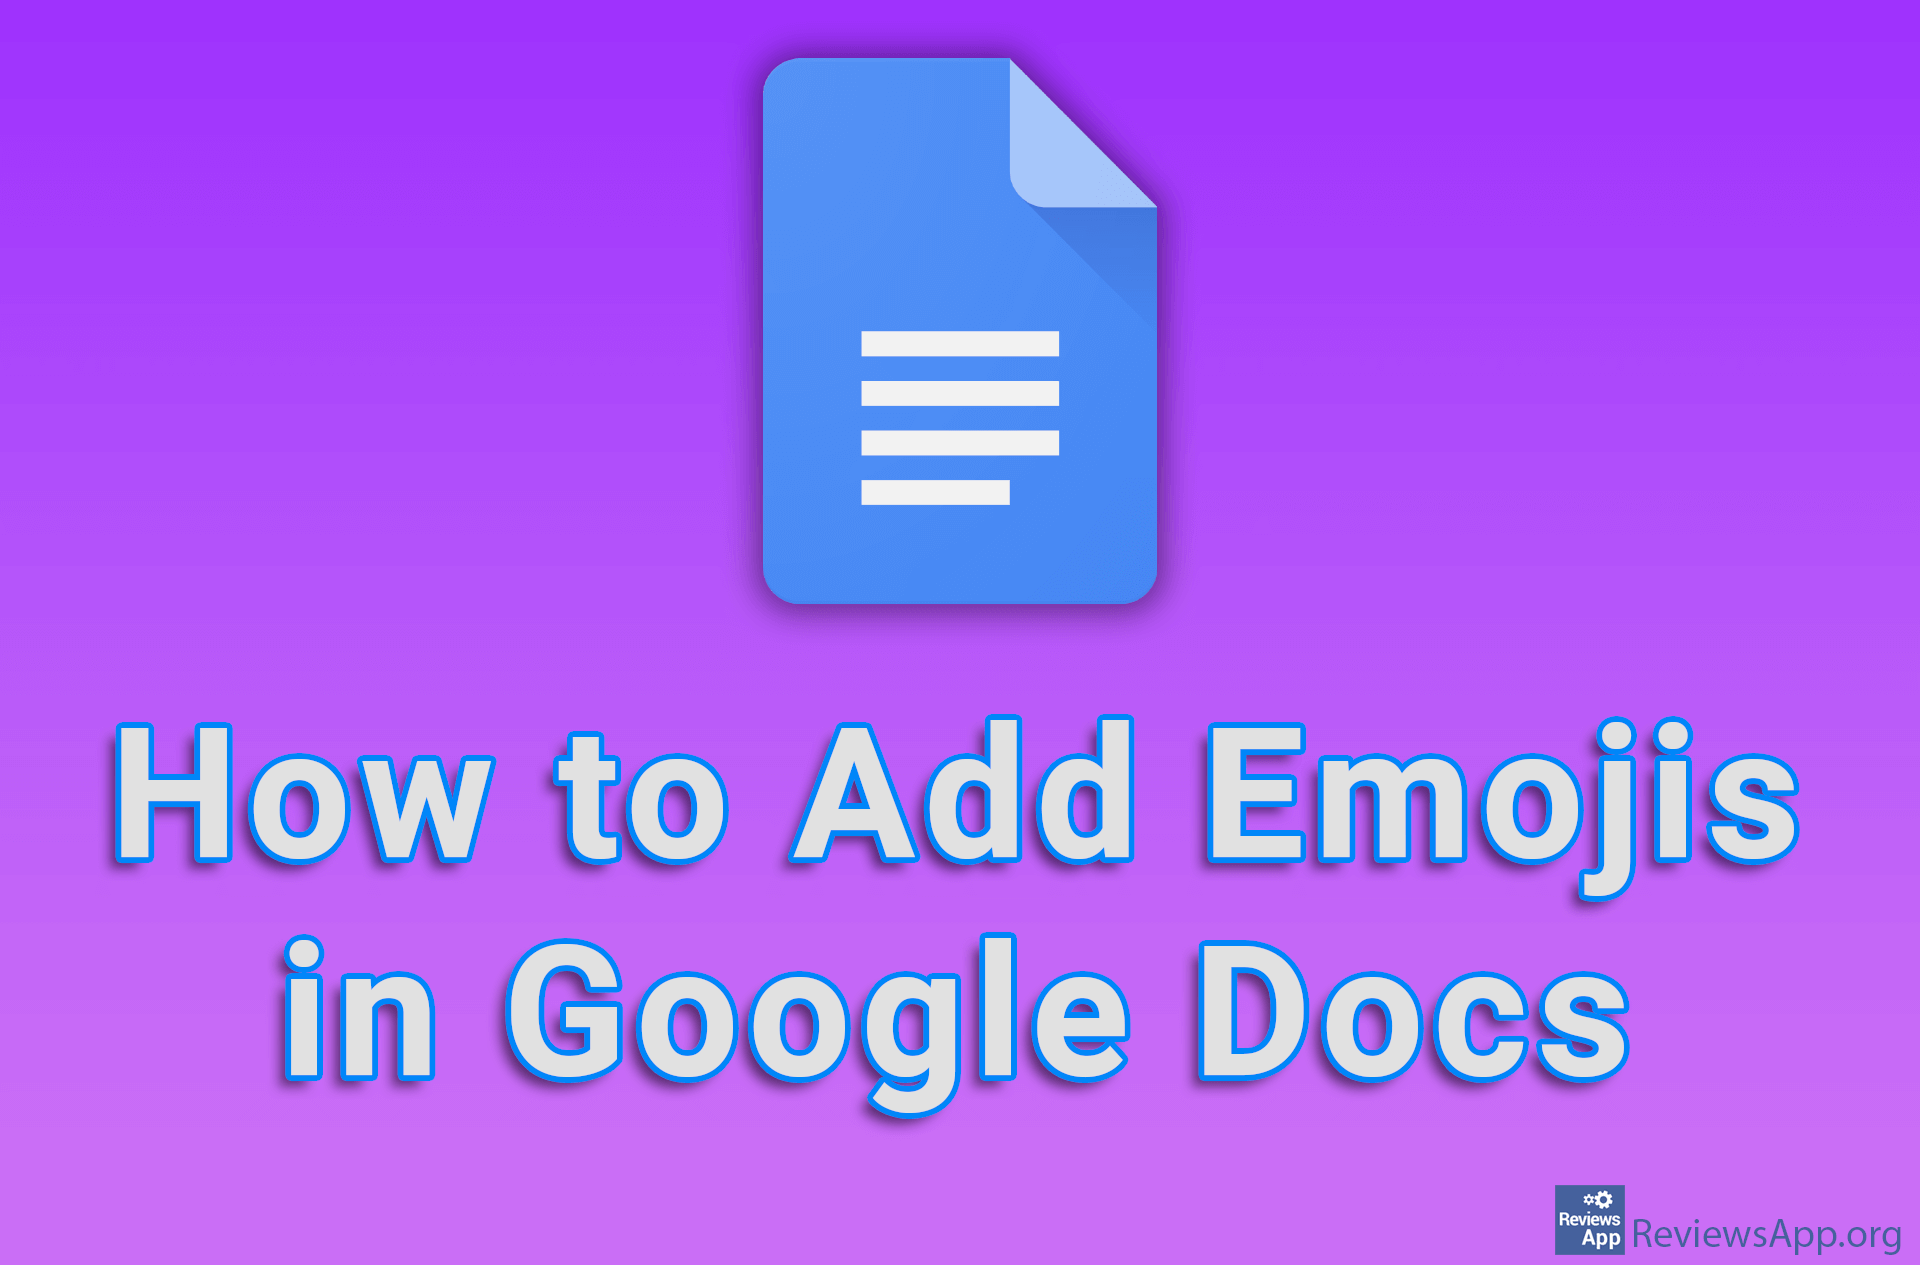 How to Add Emojis in Google Docs